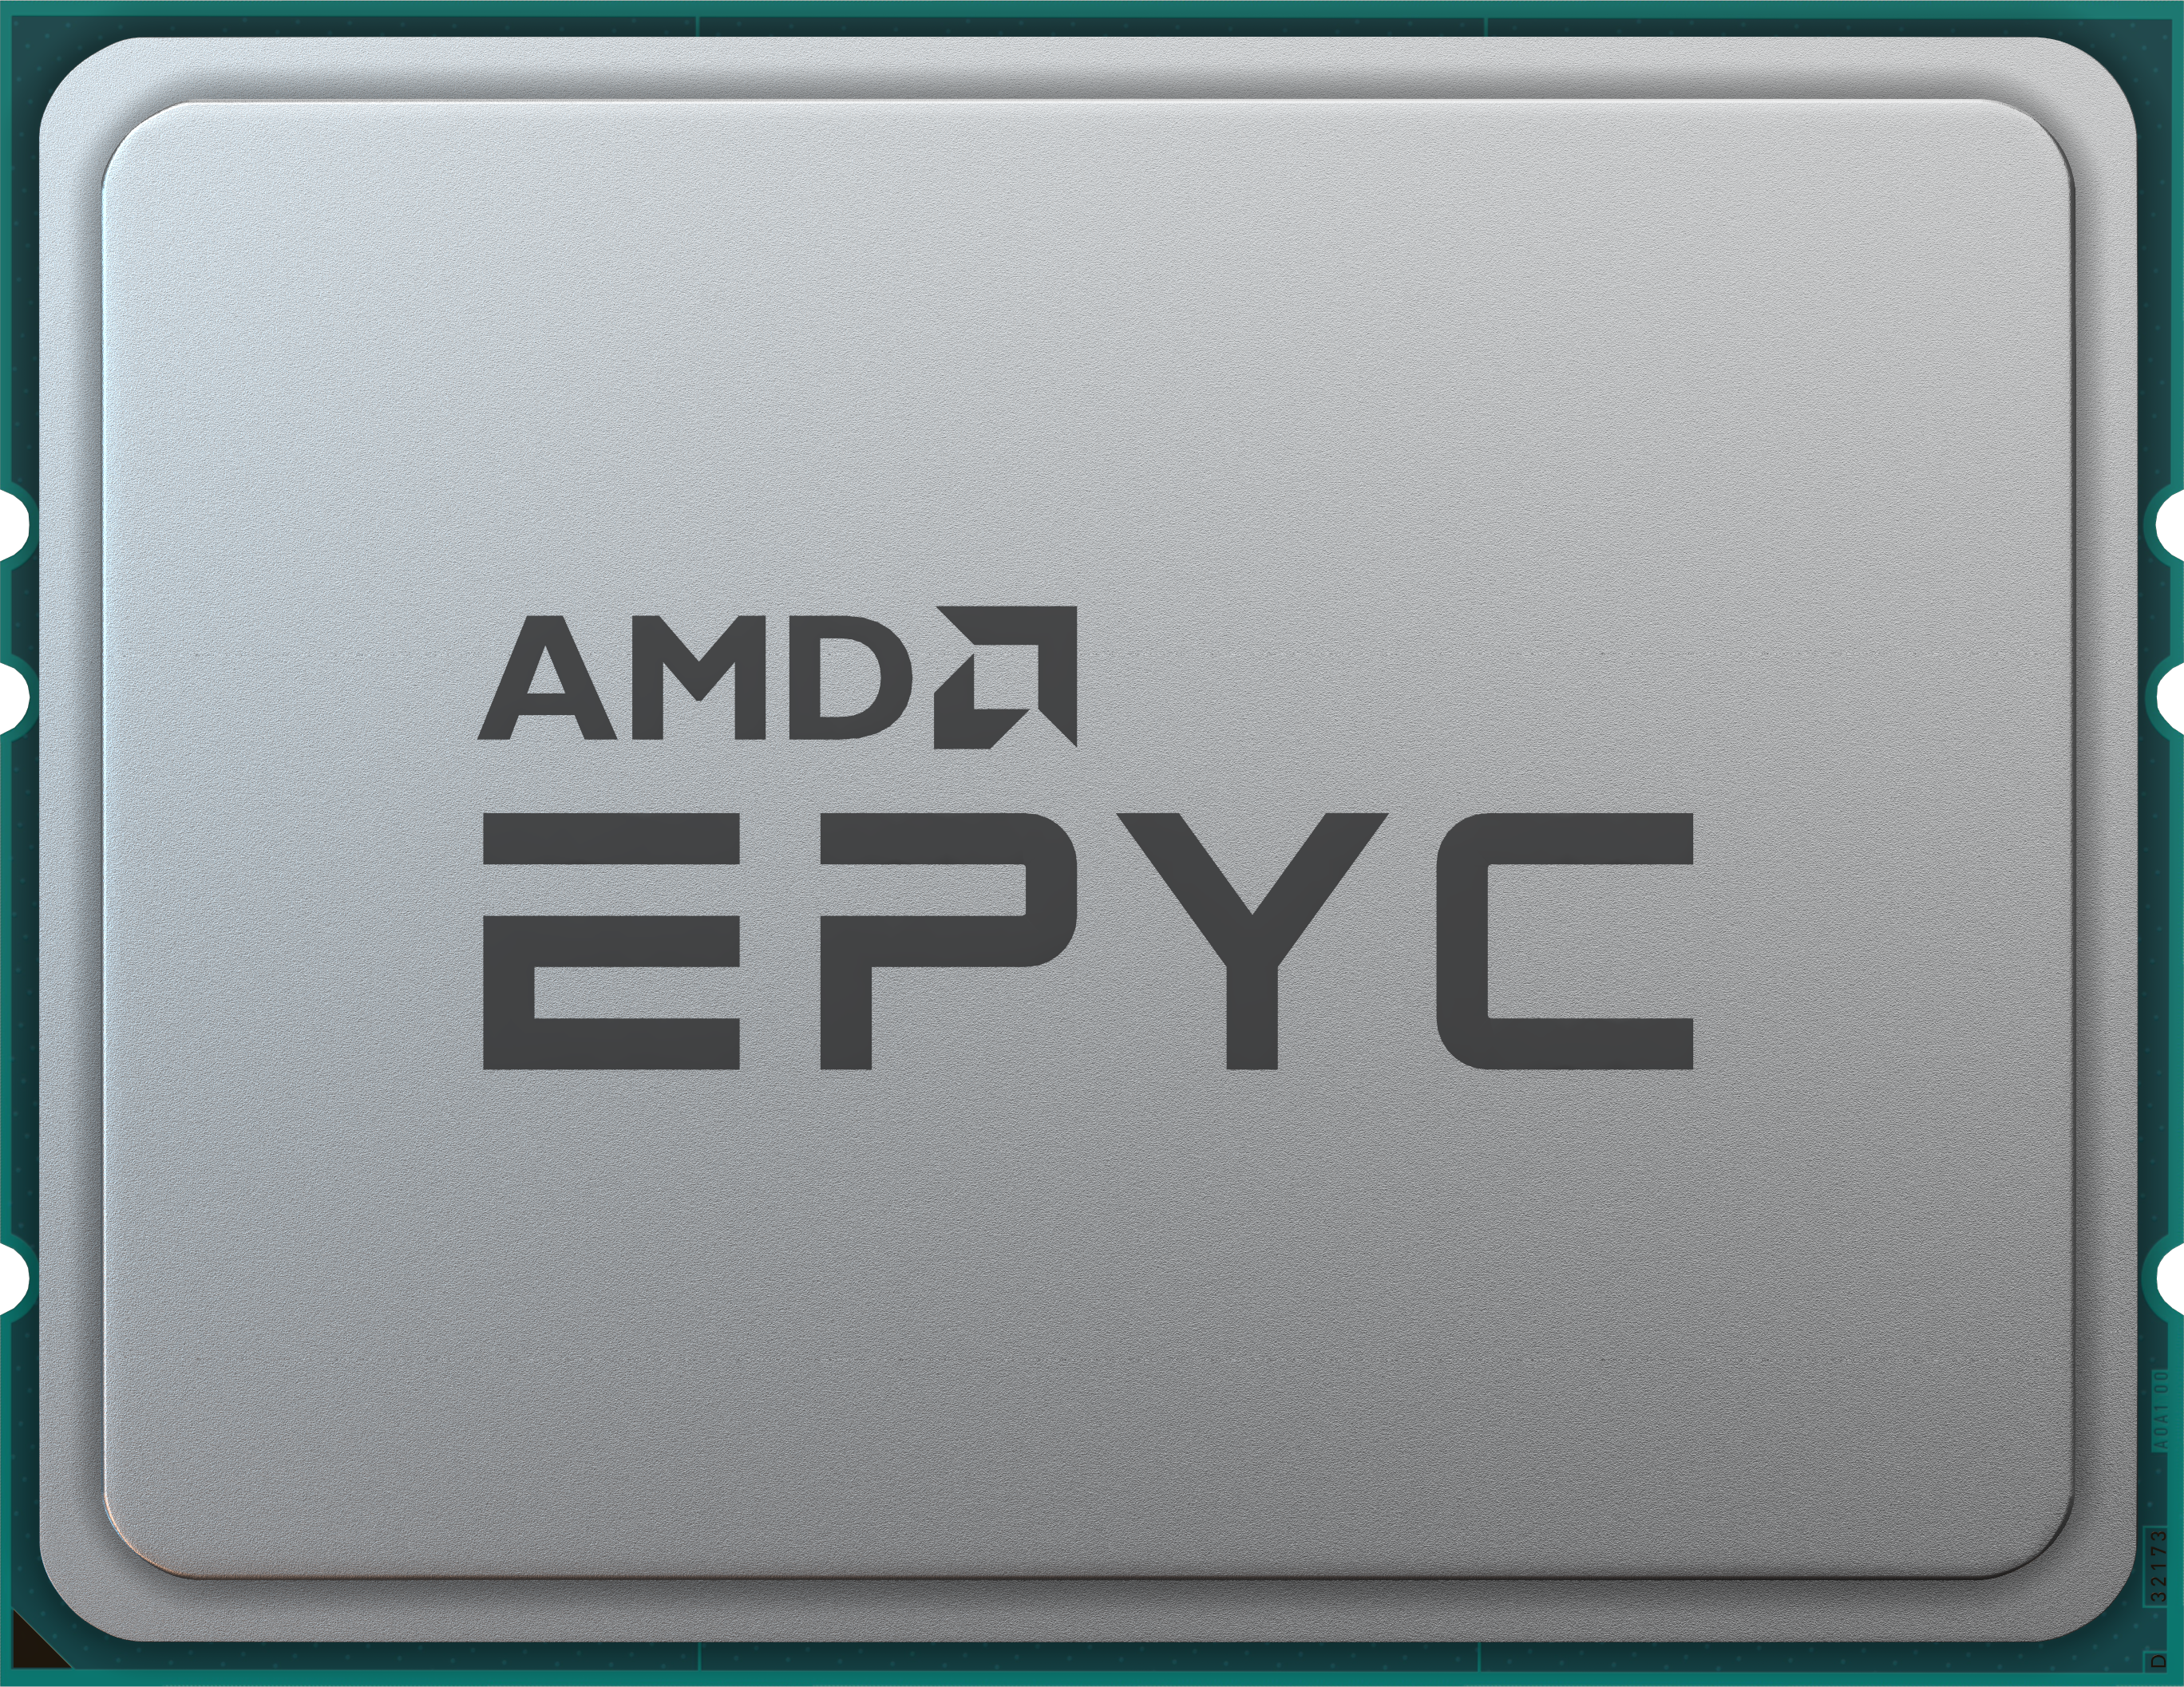 AMD-Based Systems